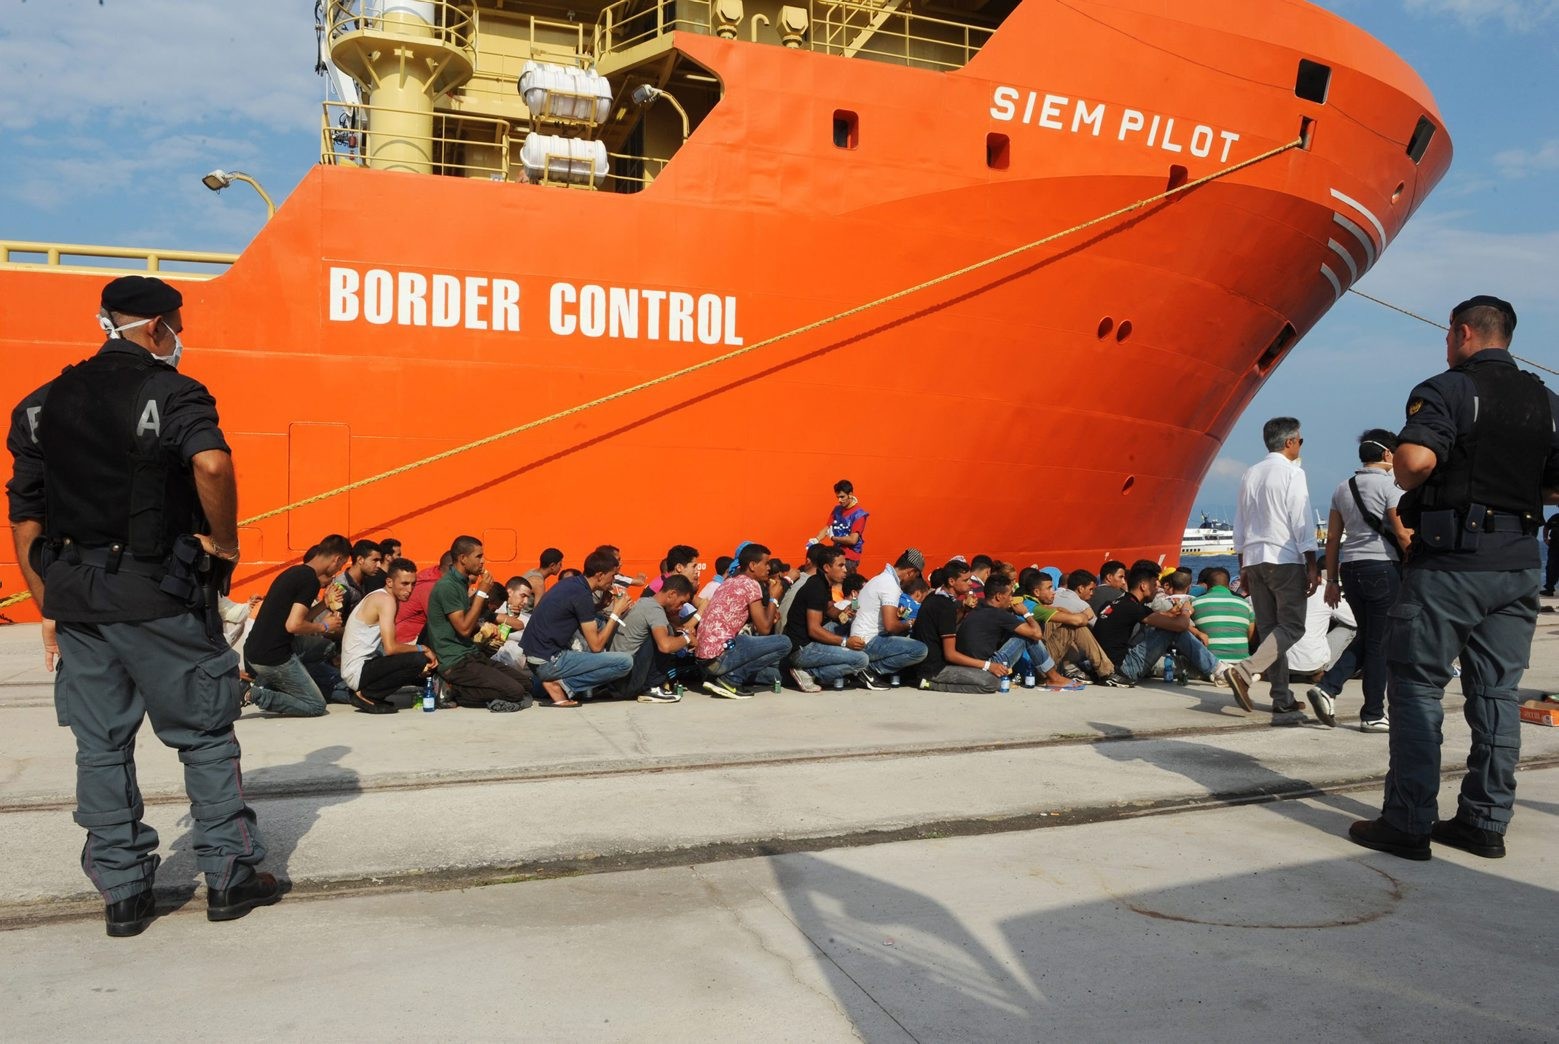 Rescued migrants line up after disembarking from the Norwegian cargo ship Siem Pilot at the Reggio Calabria's harbor, Italy, Saturday, Aug. 8, 2015. Nearly 100,000 migrants have reached Italy by sea this year, and 90,000 reached Greece by sea, the IOM said. (AP Photo/Adriana Sapone) Italy Migrants